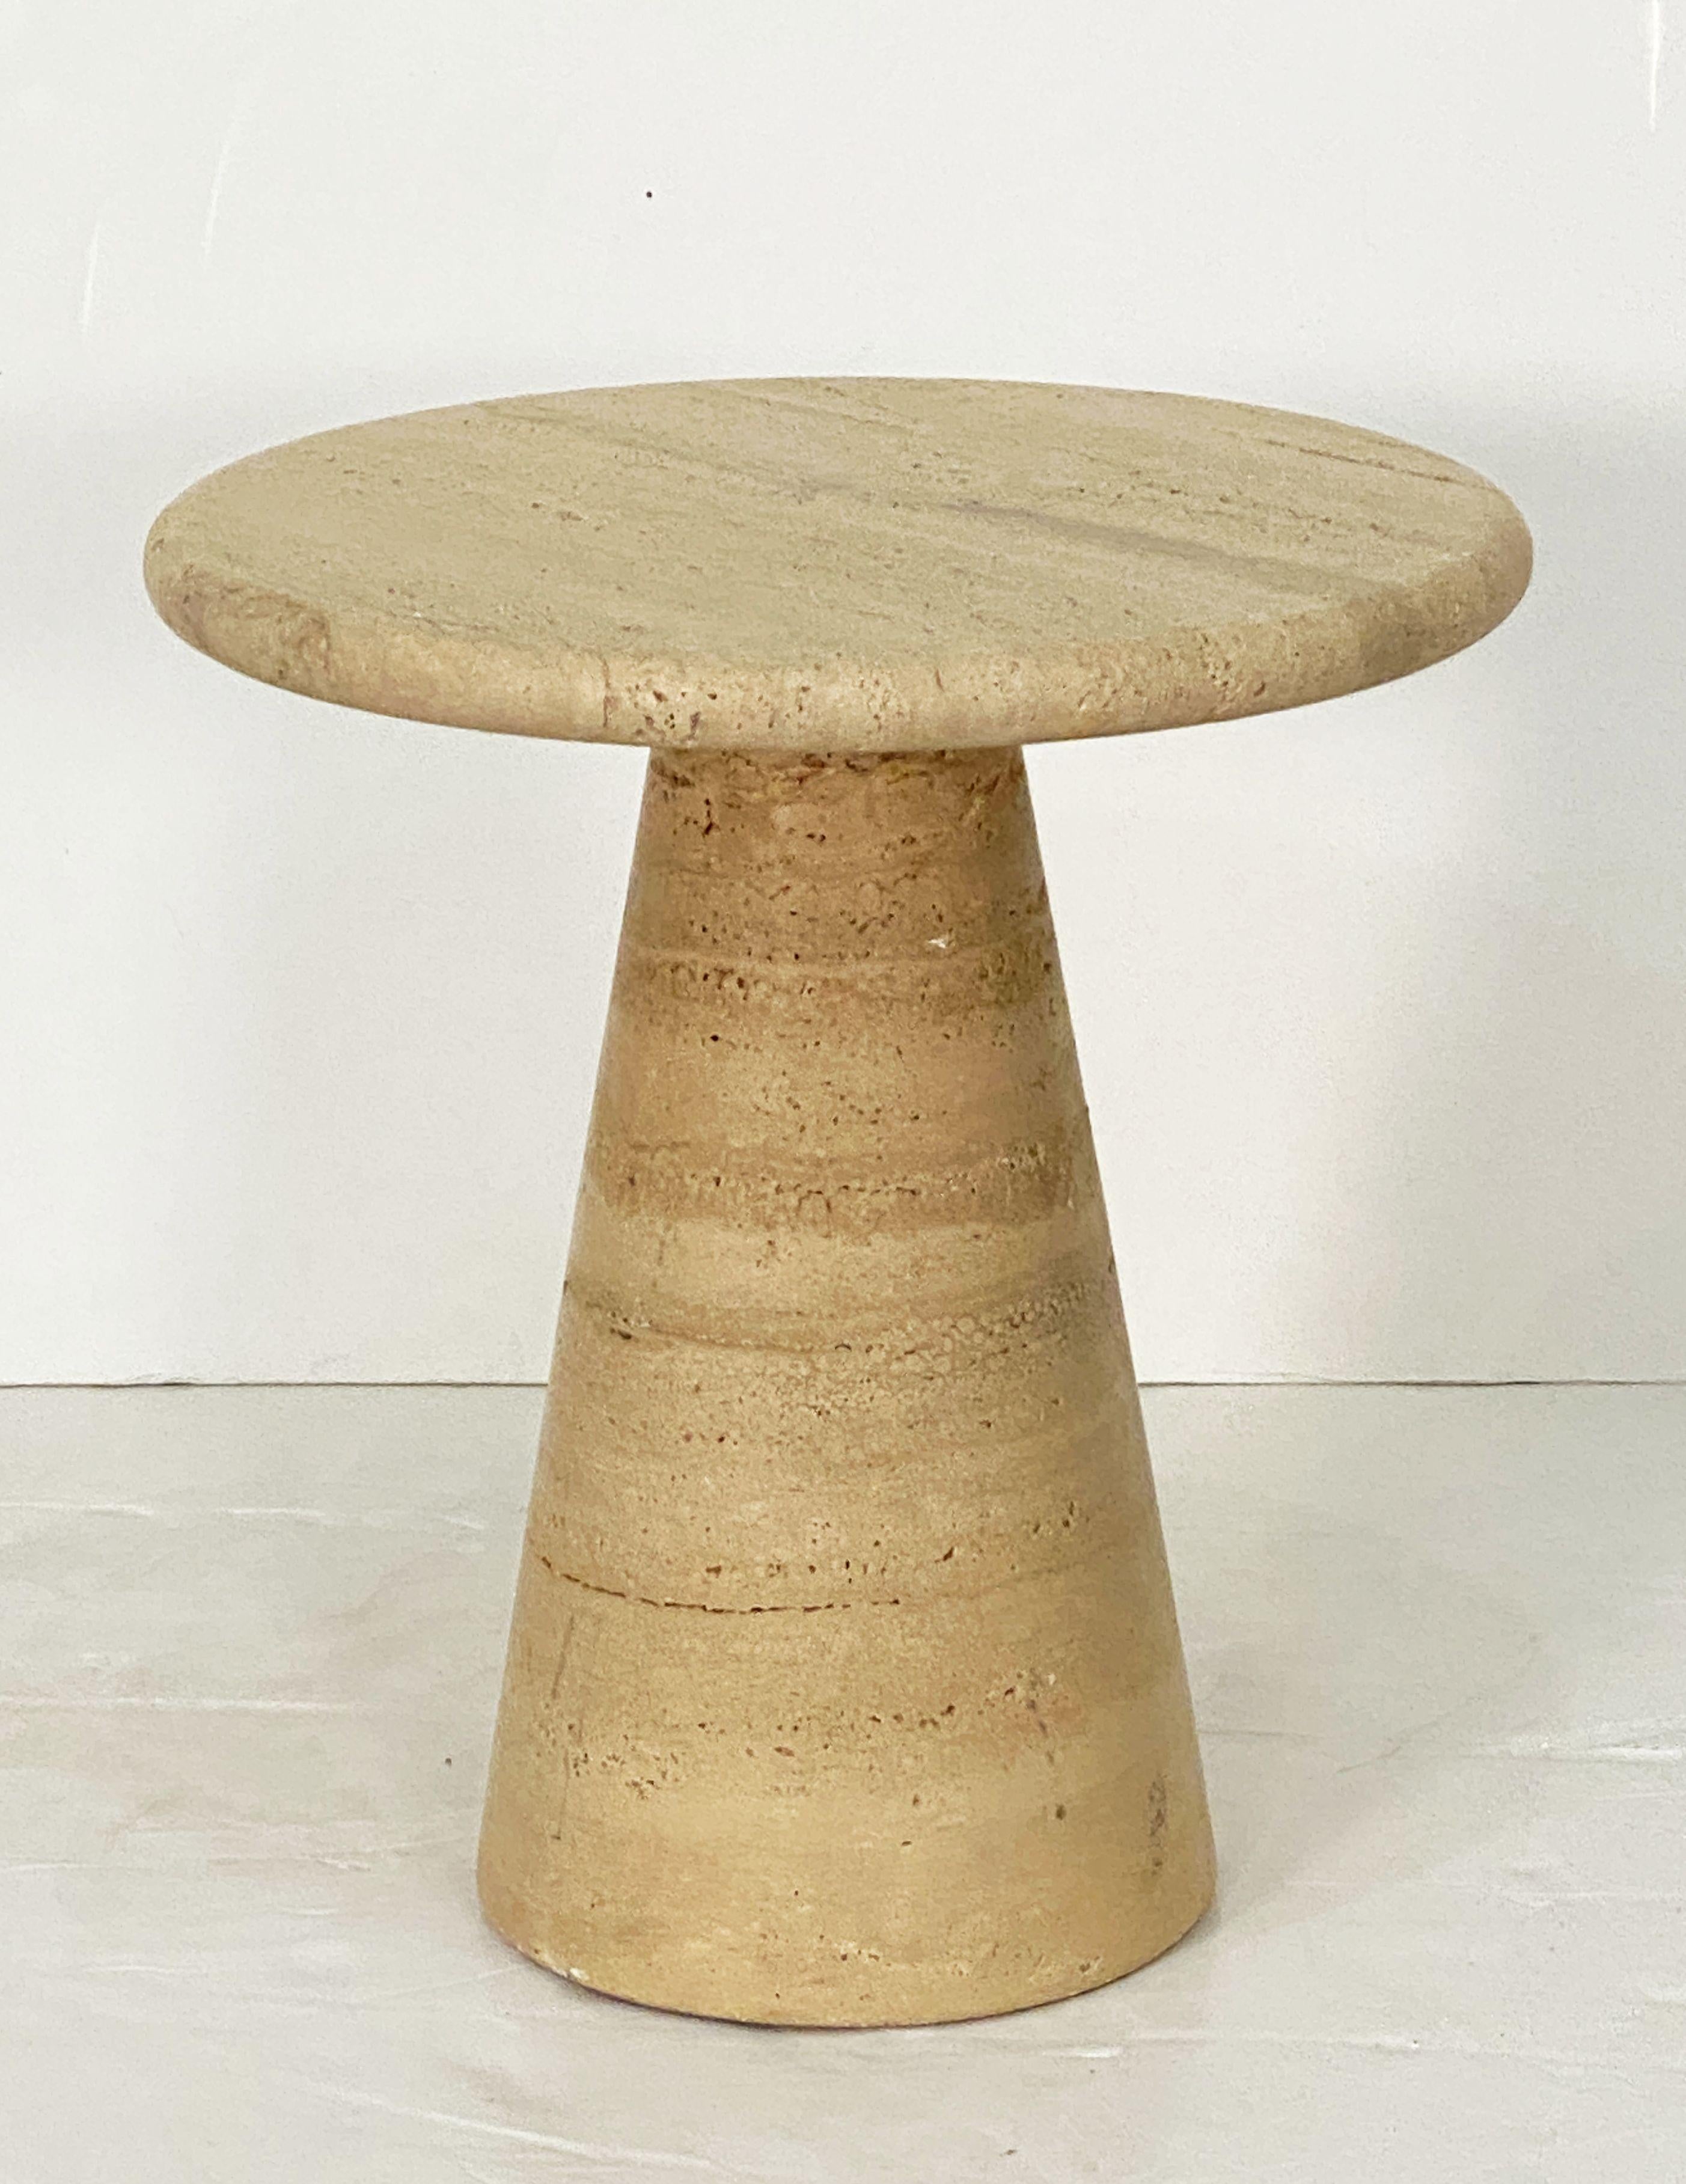 Italian Modernist Conical Table of Travertine Stone from Italy (Four Available) For Sale